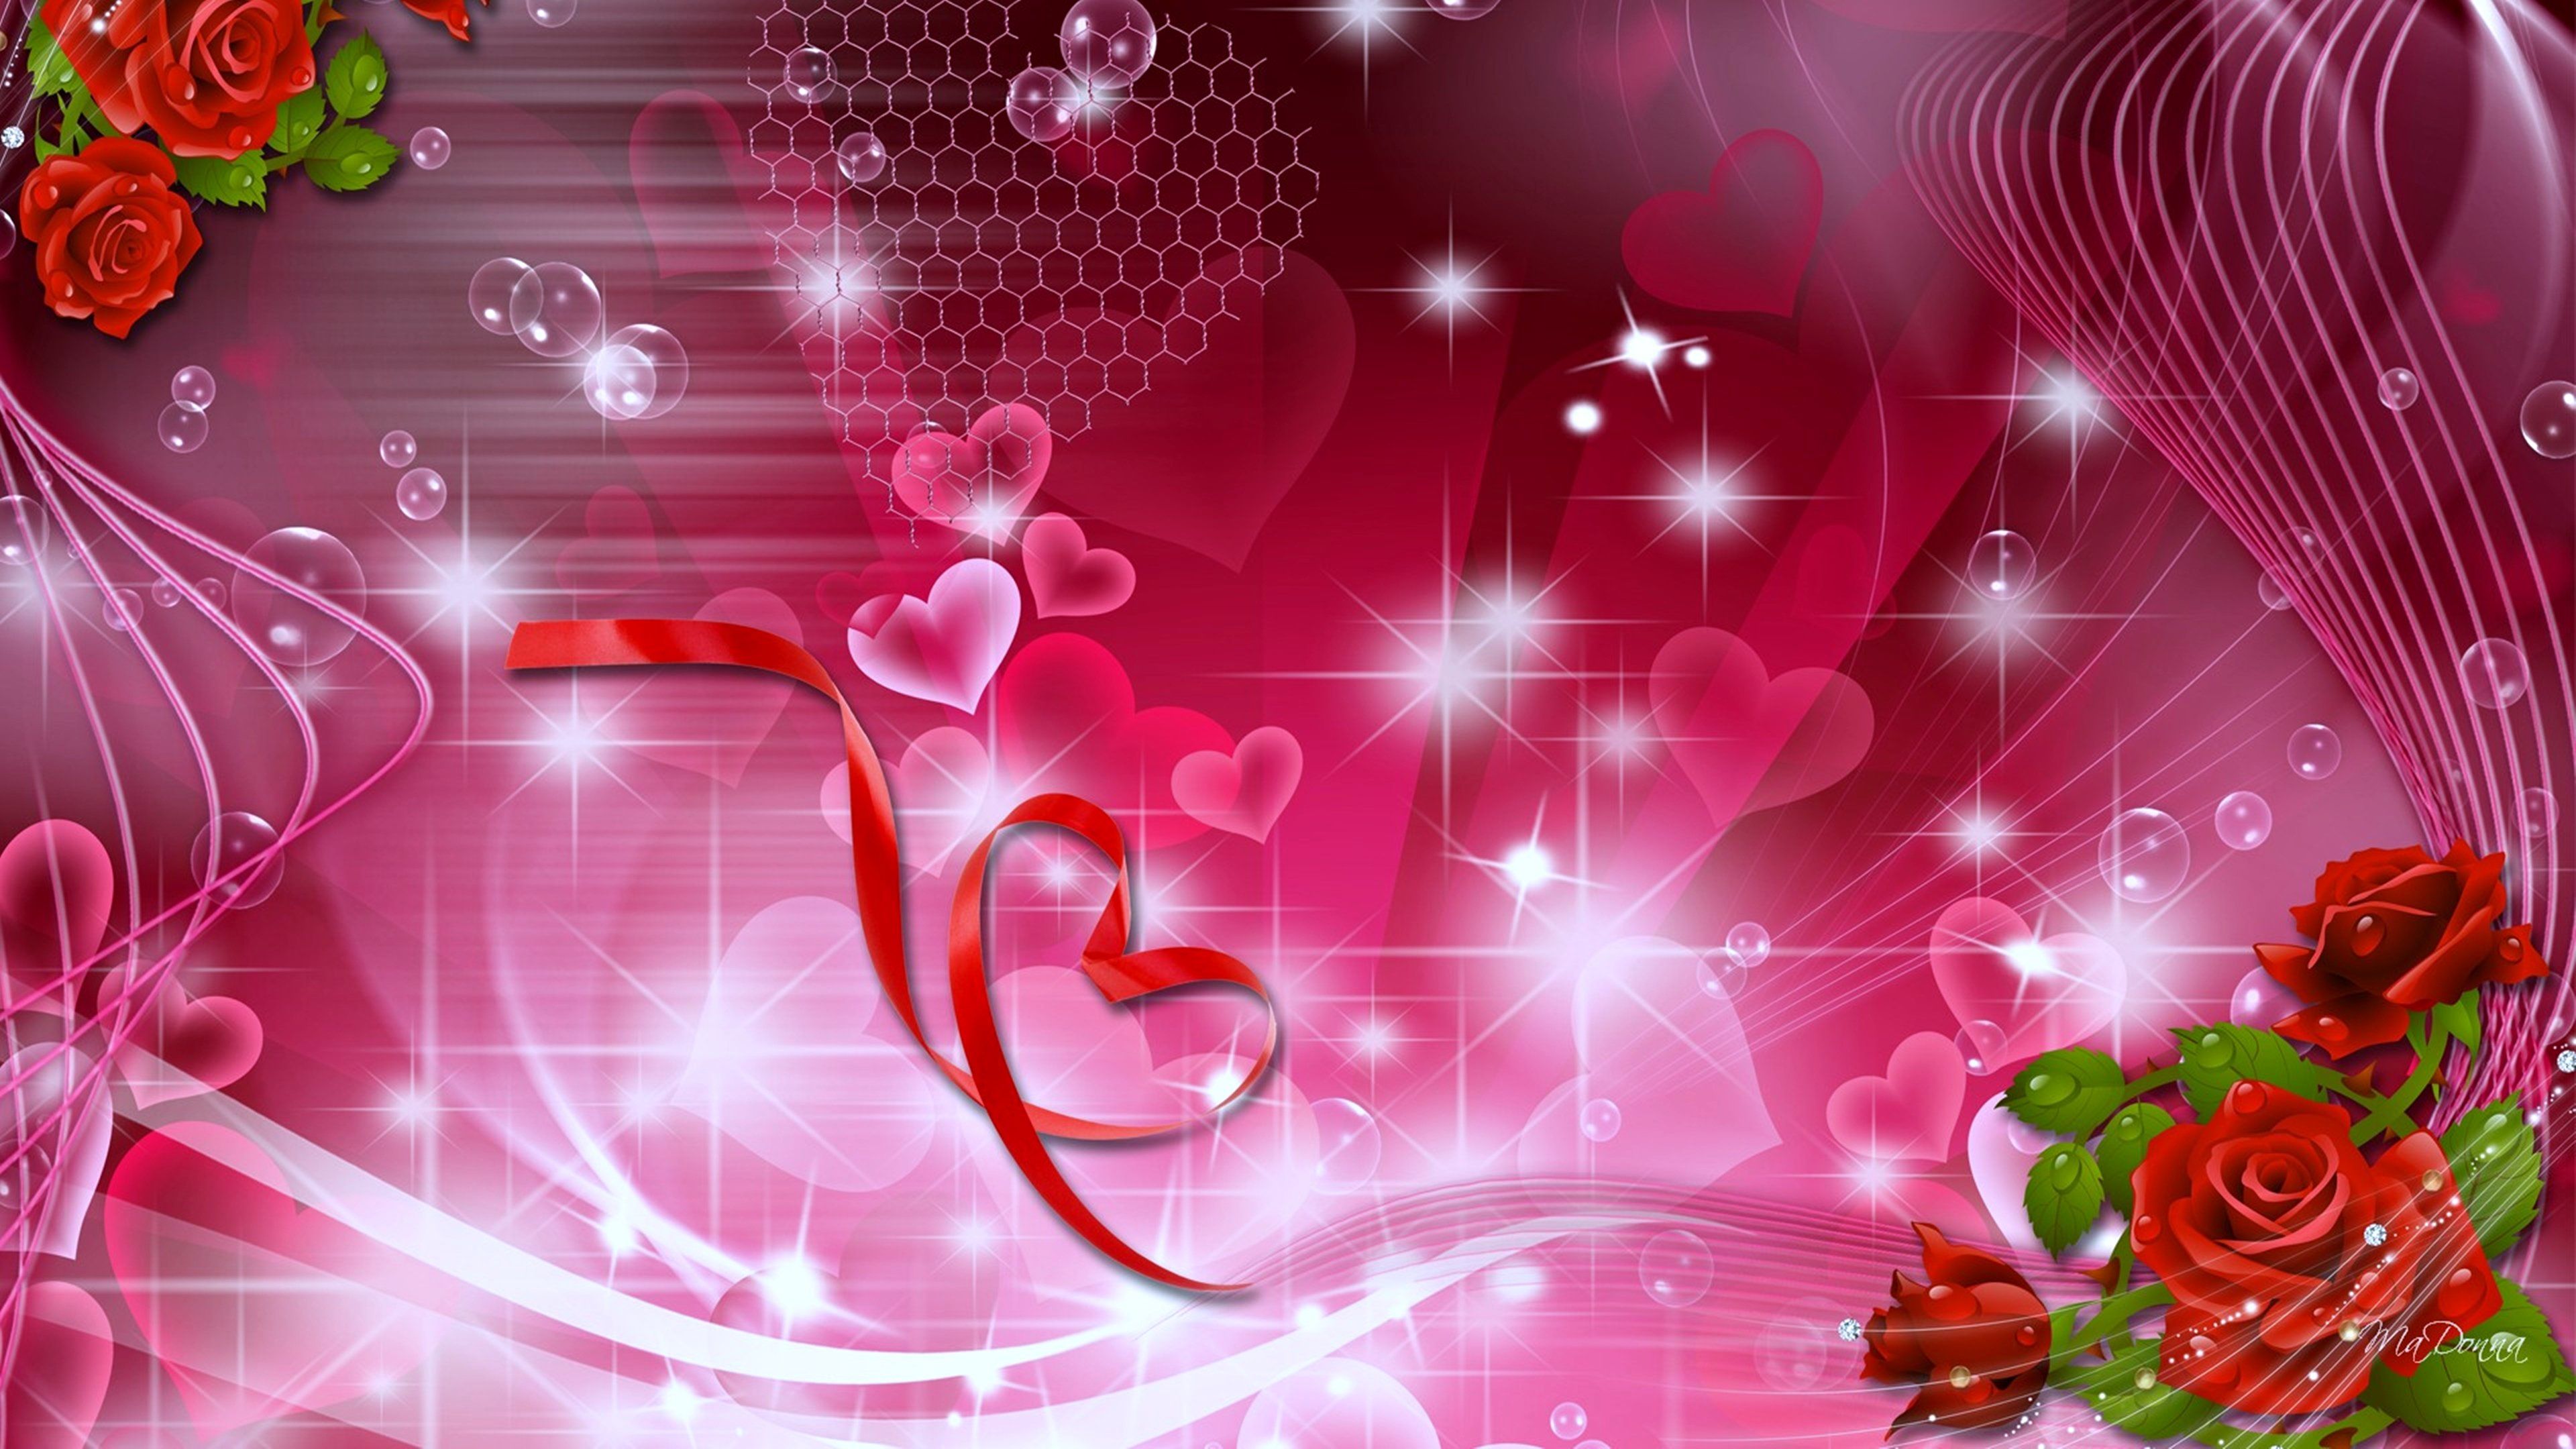 flowers, Roses, Hearts, Stars, Love, Gift, Magical, Wallpaper